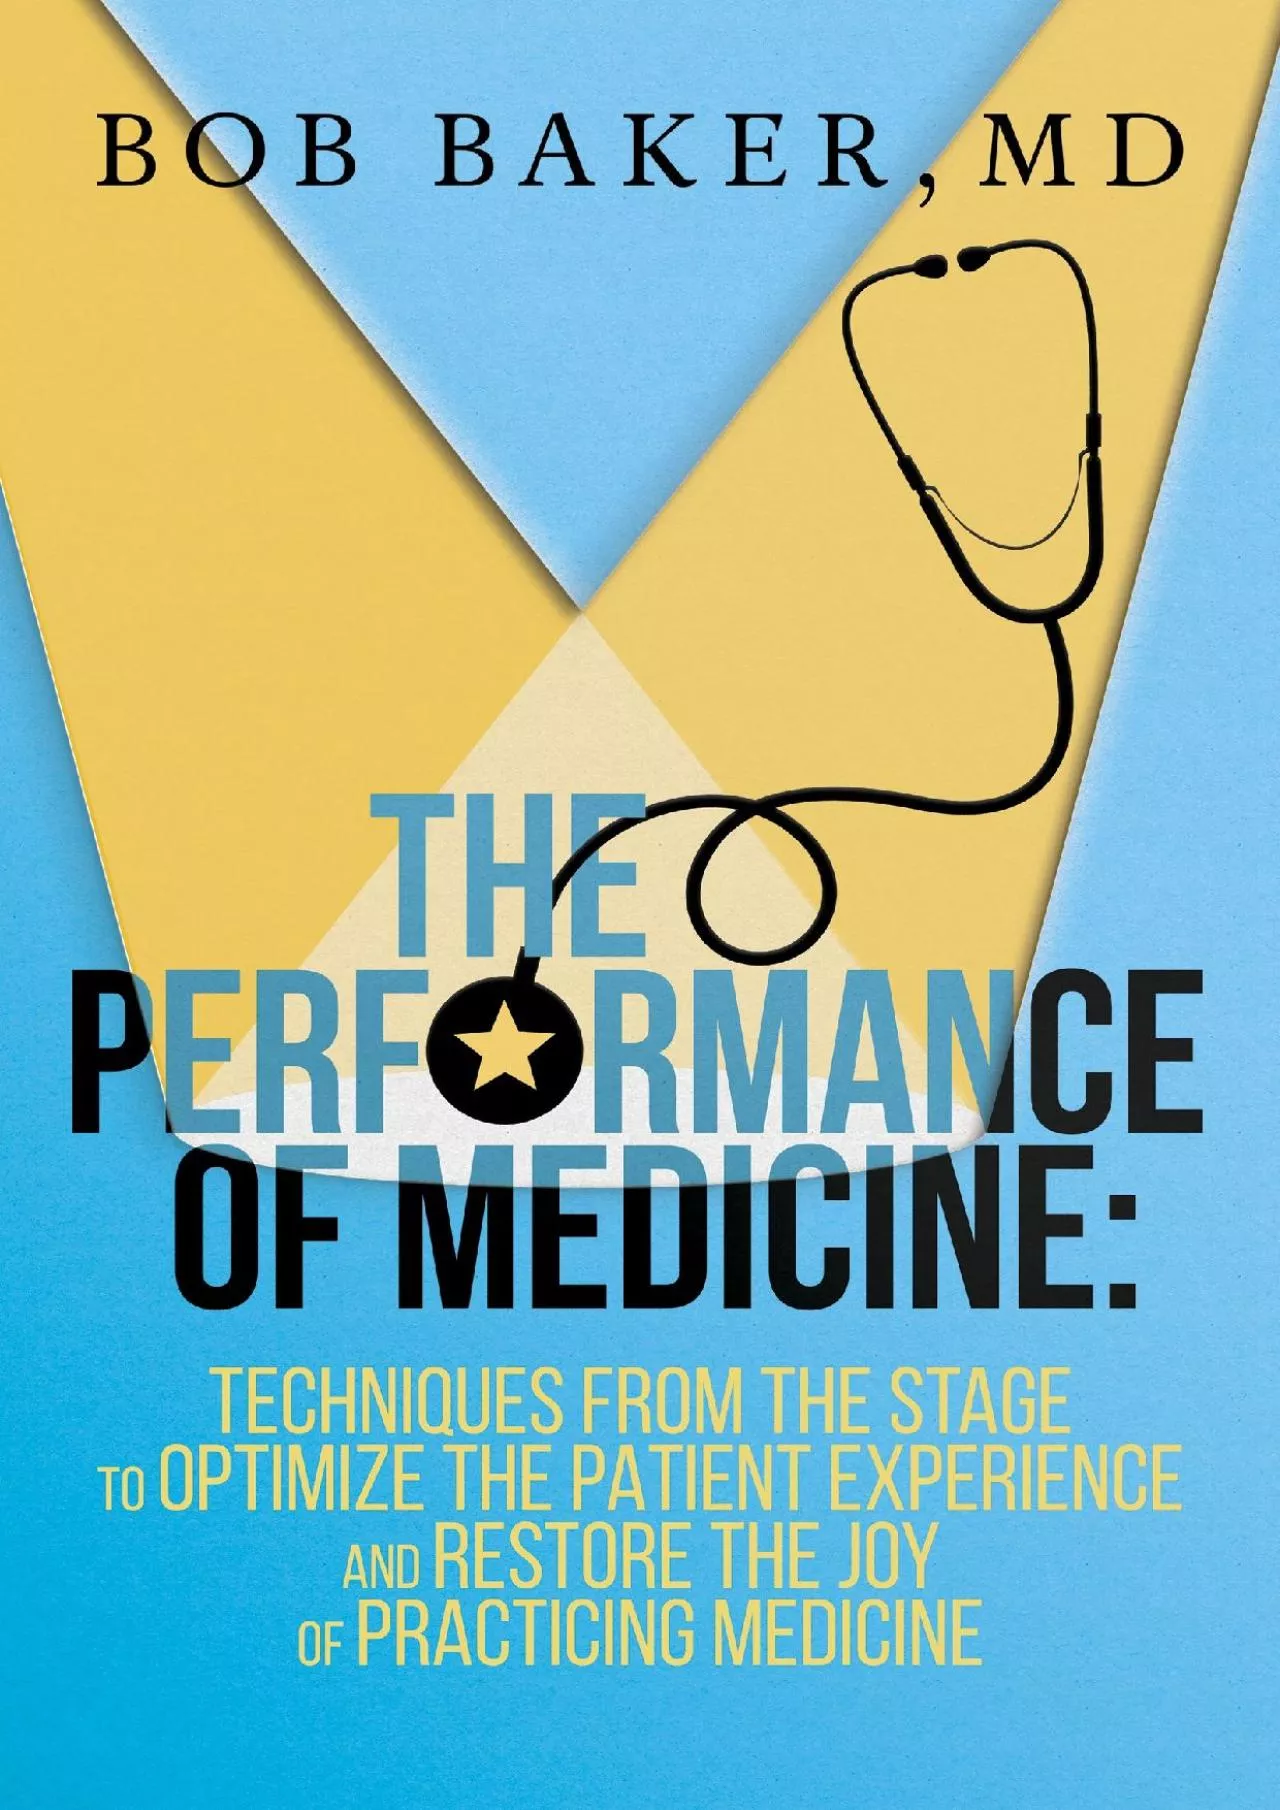 (DOWNLOAD)-The Performance of Medicine: Techniques From the Stage to Optimize the Patient